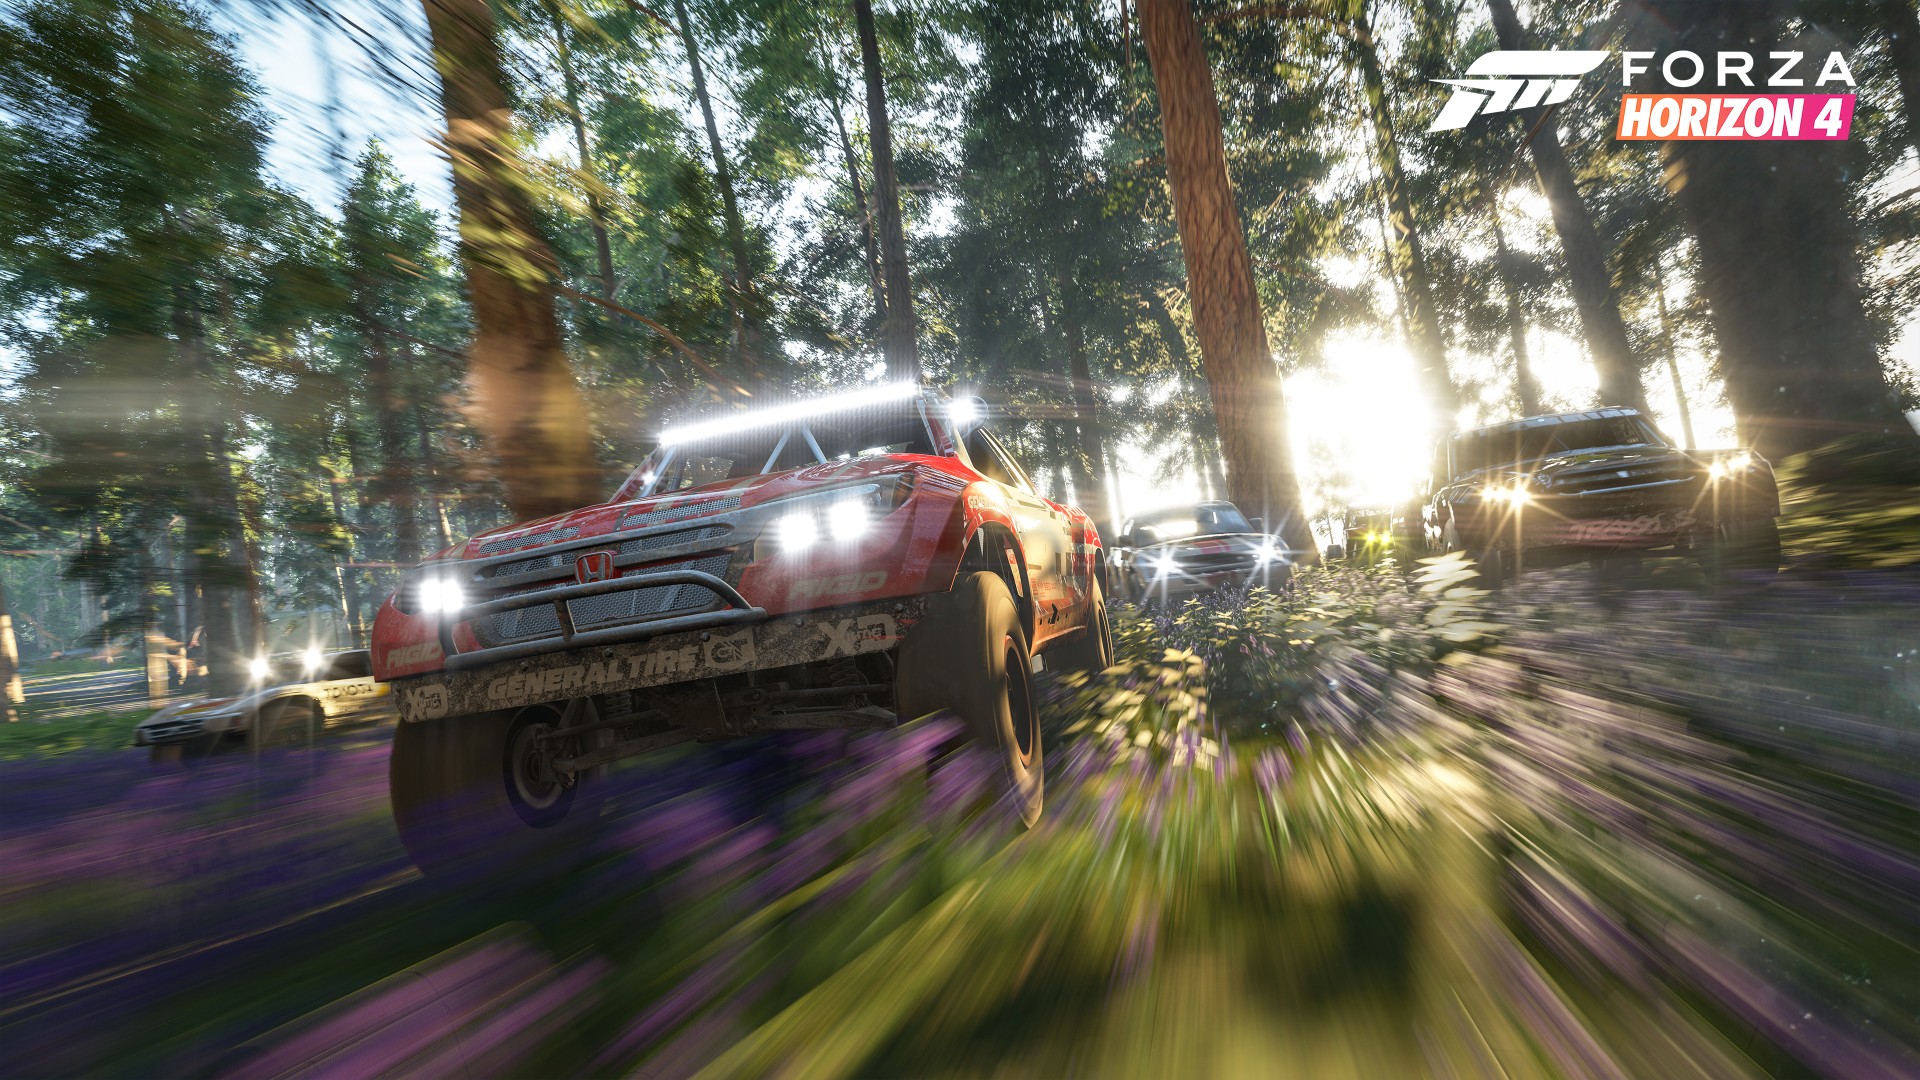 E3 2018: Getting Our Hands Warm, Cold, and Dirty with the Forza Horizon 4 Seasons Demo